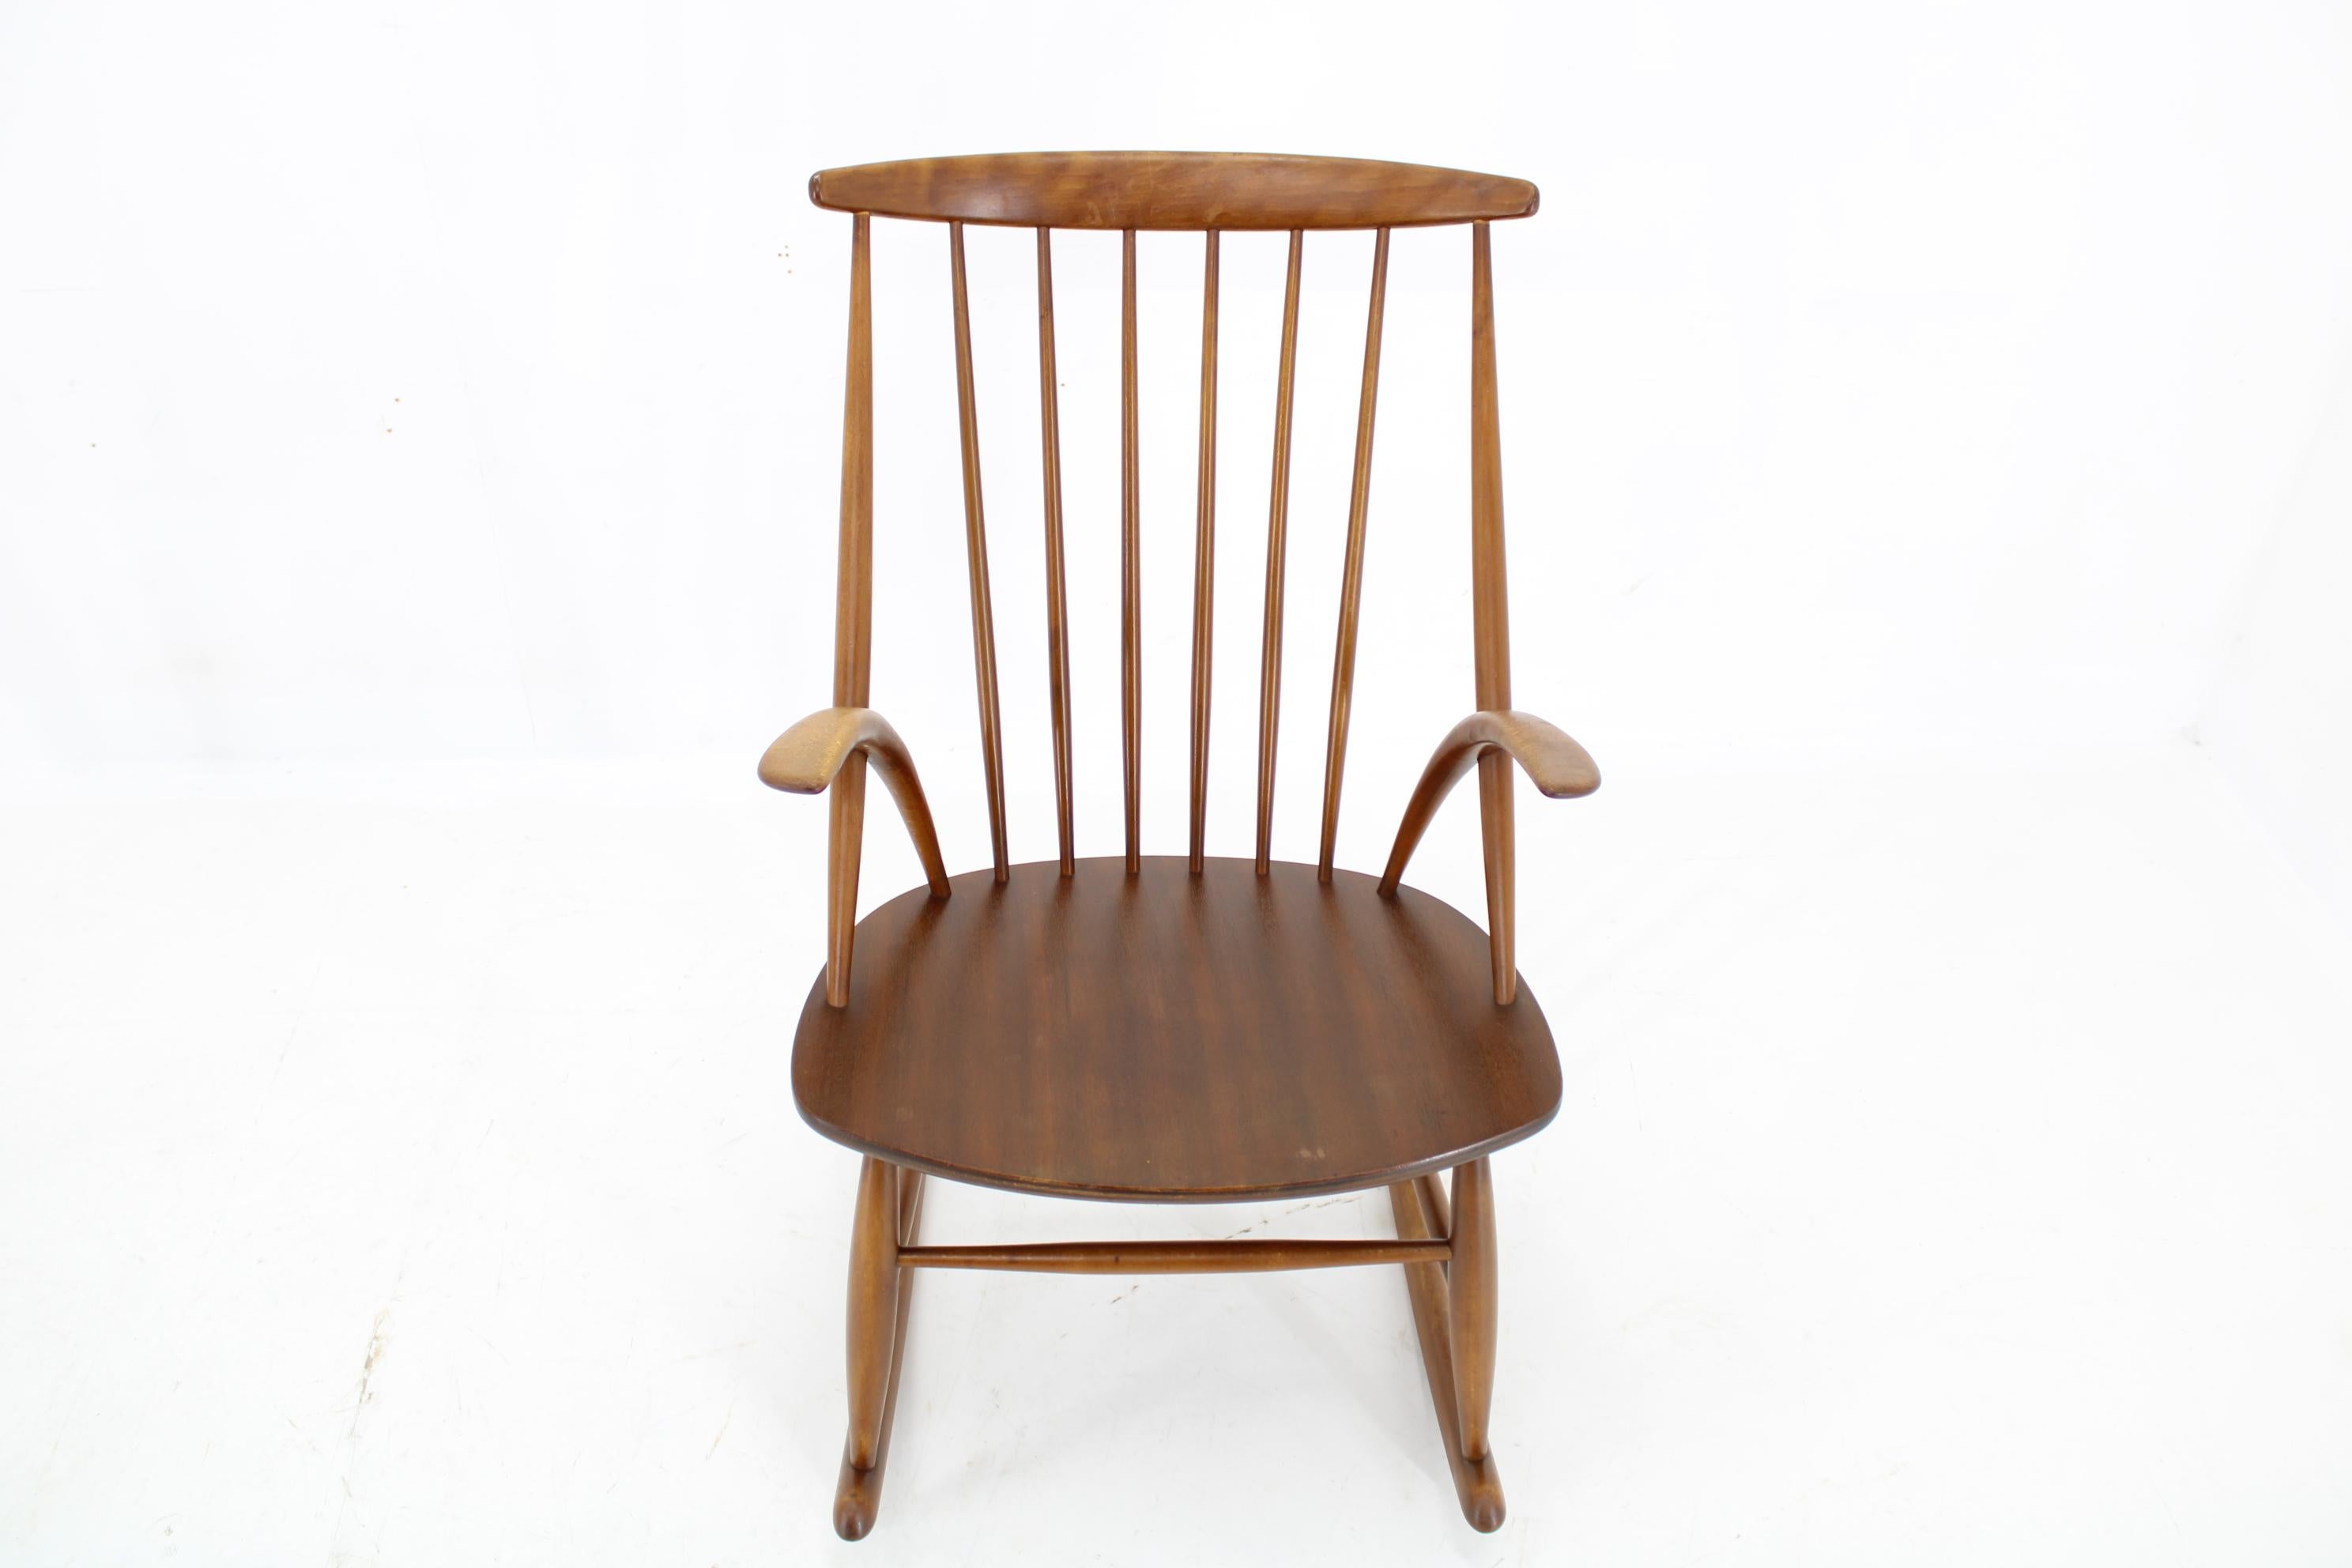 1960s Illum Wikkelso Gyngestol No. 3 Rocking Chair for Niels Eilersen, 2 items a For Sale 5